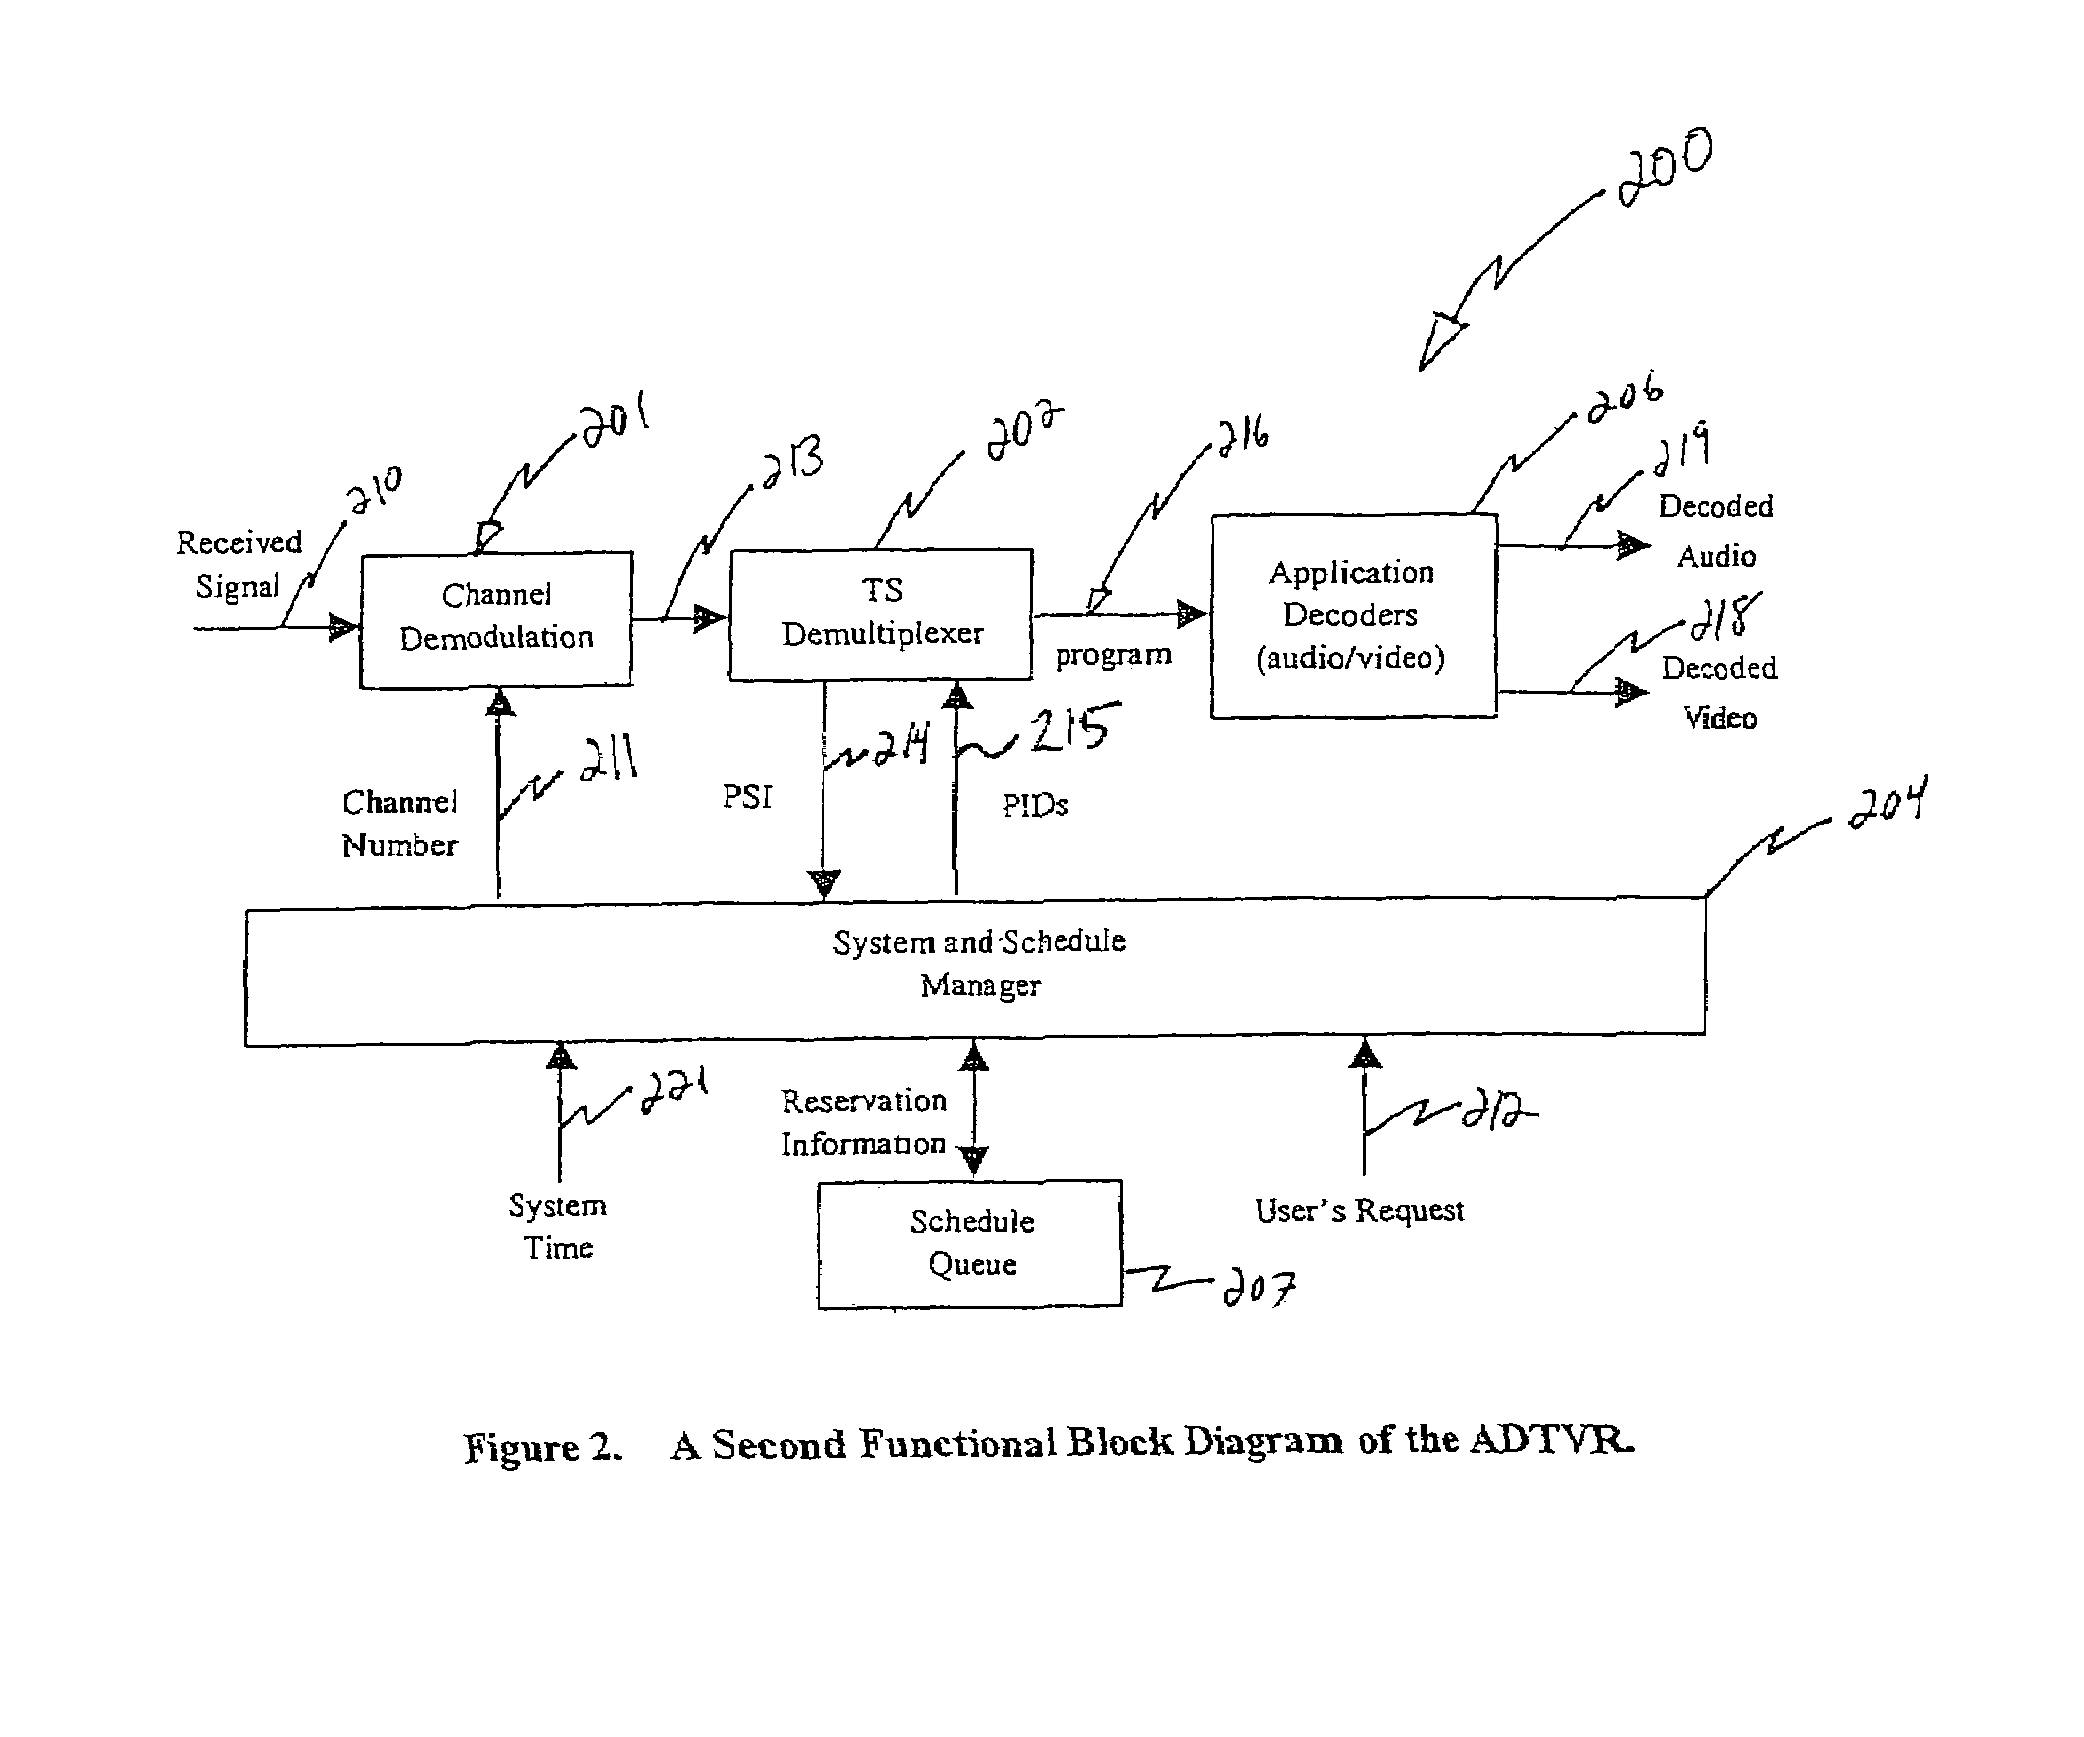 Method and apparatus for broadcasting, viewing, reserving and/or delayed viewing of digital television programs